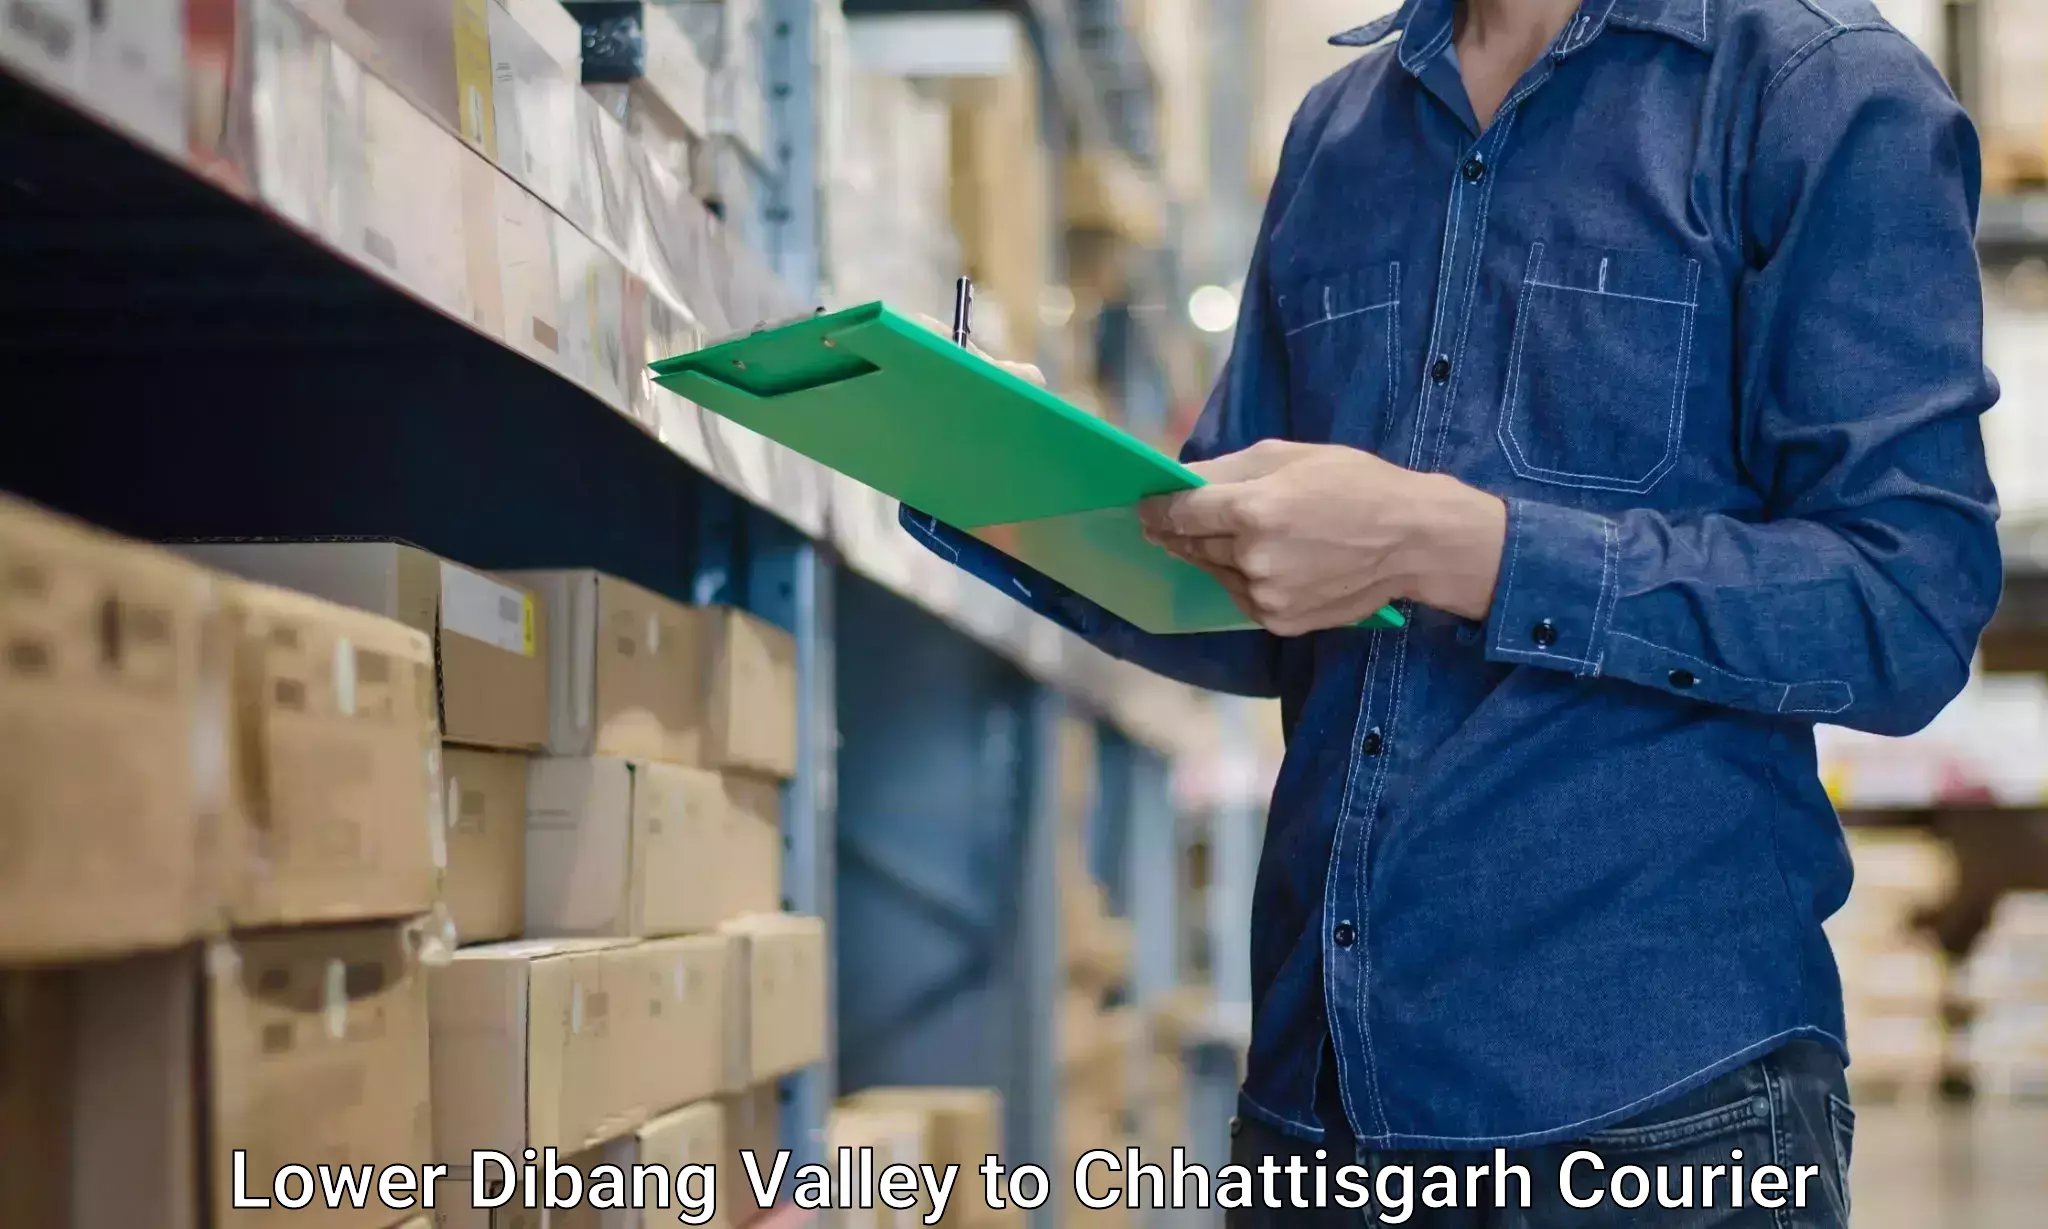 Professional moving company Lower Dibang Valley to Basna